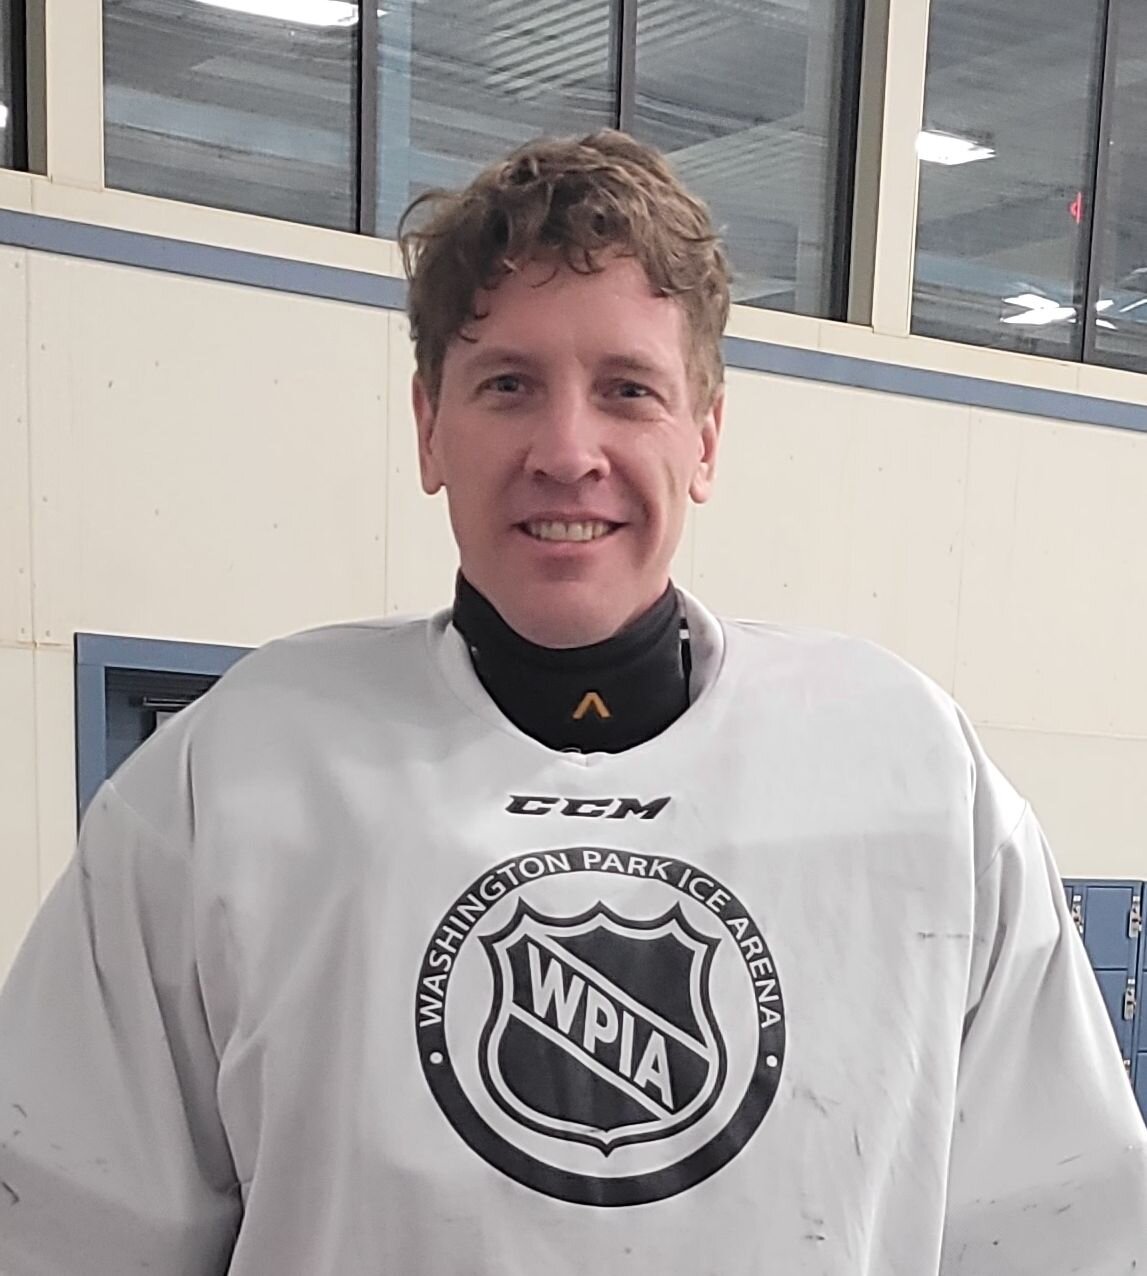 Meet John Ogan- our goalie instructor for Twisters Goalie Clinic- next Saturday, March 18th from 10am to 12pm. Please see our events page and be sure to comment with age, size and experience of your goalie!

John originally is from the St. Louis area